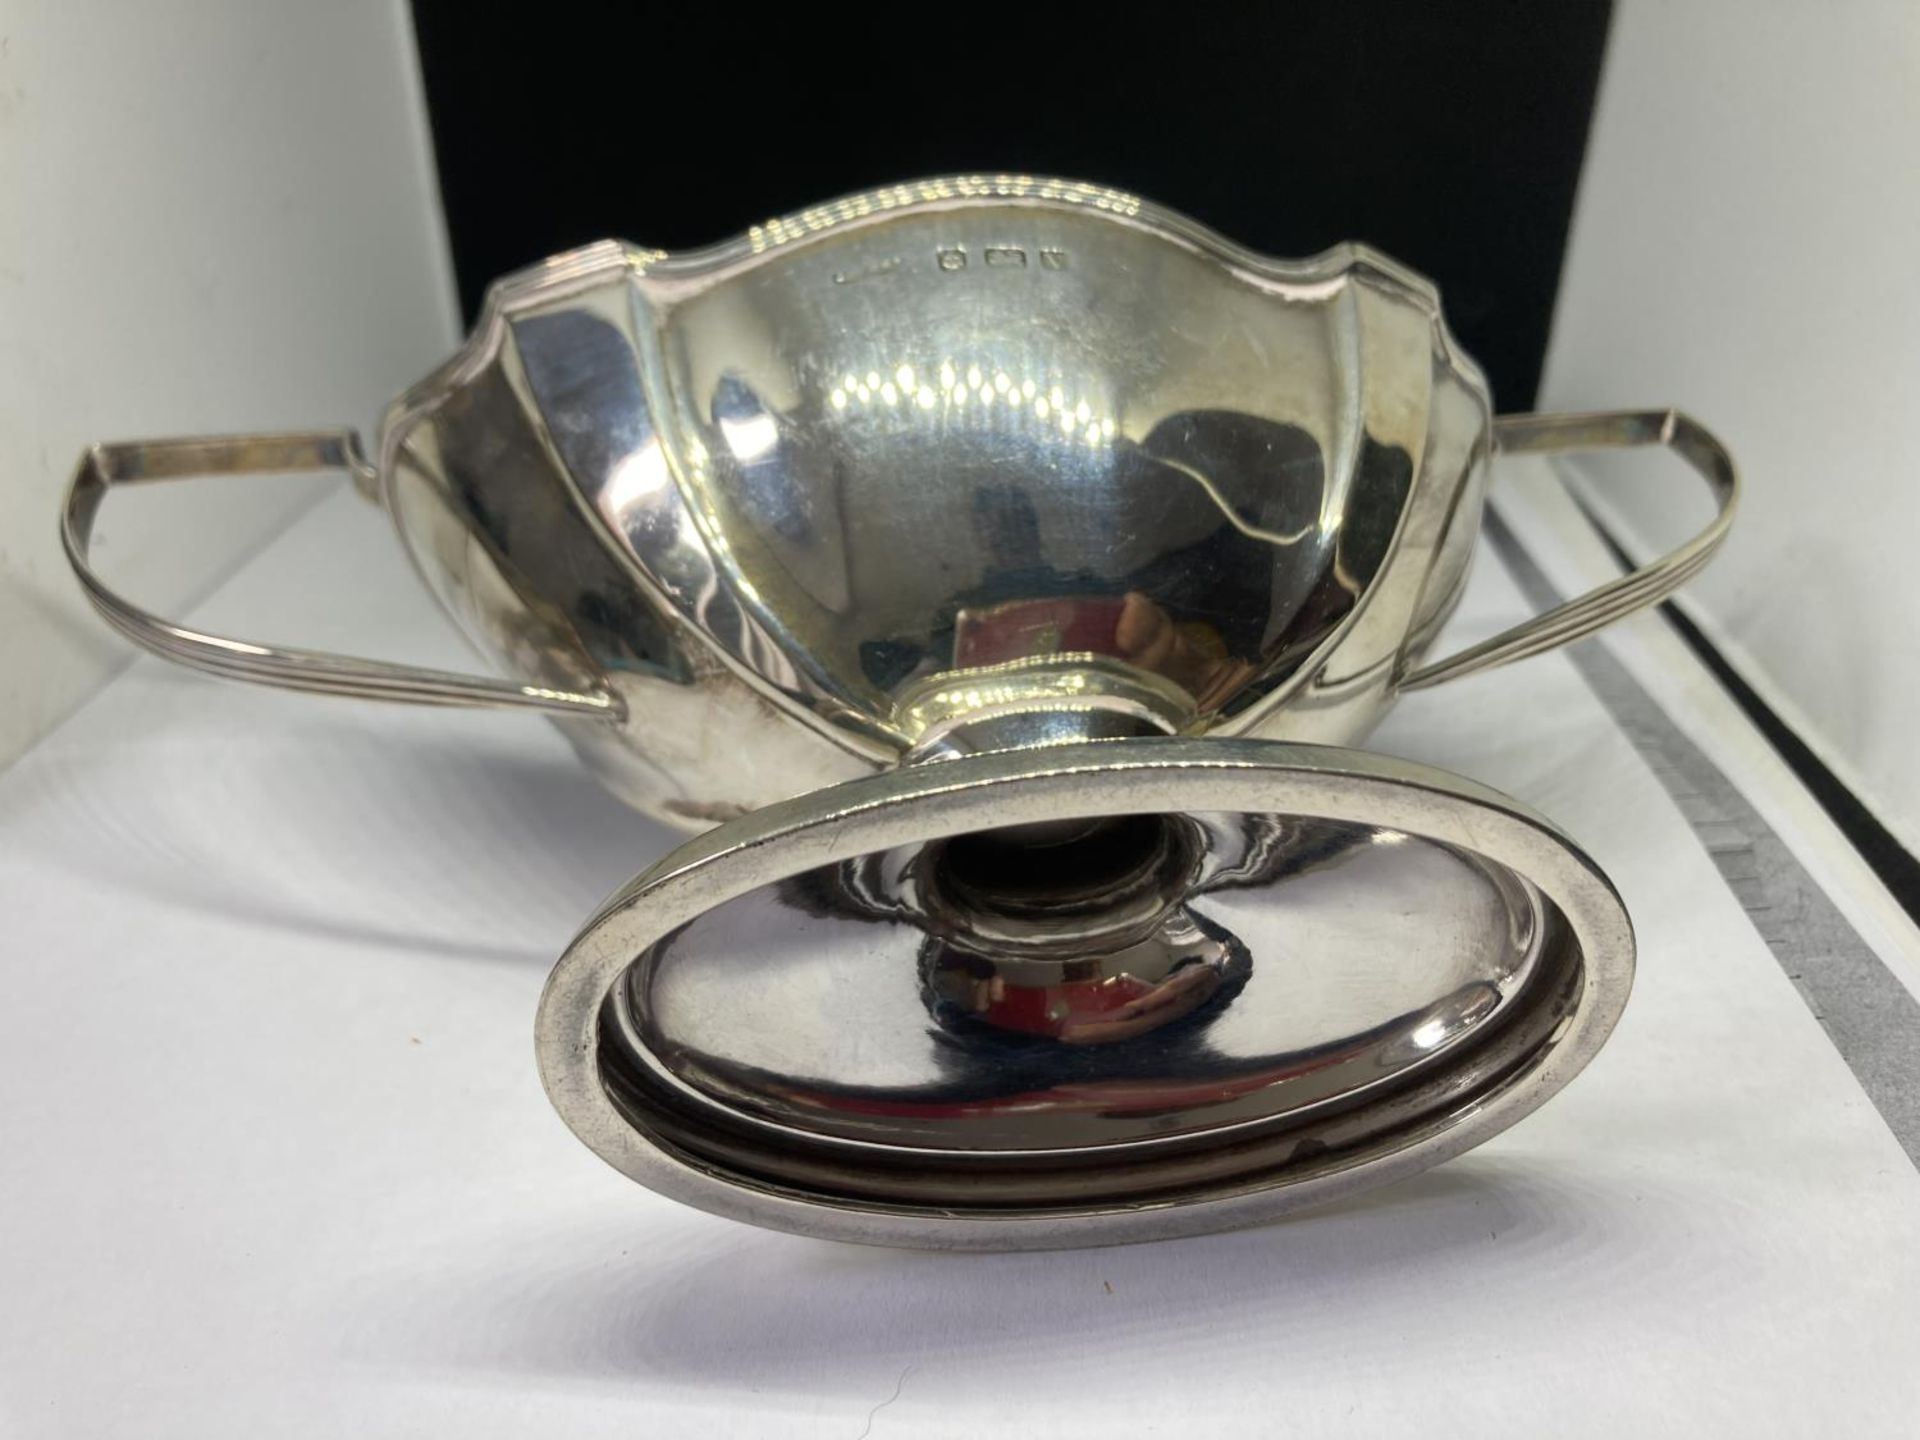 A HALLMARKED BIRMINGHAM SILVER TWIN HANDLED DISH GROSS WEIGHT 133 GRAMS - Image 4 of 5